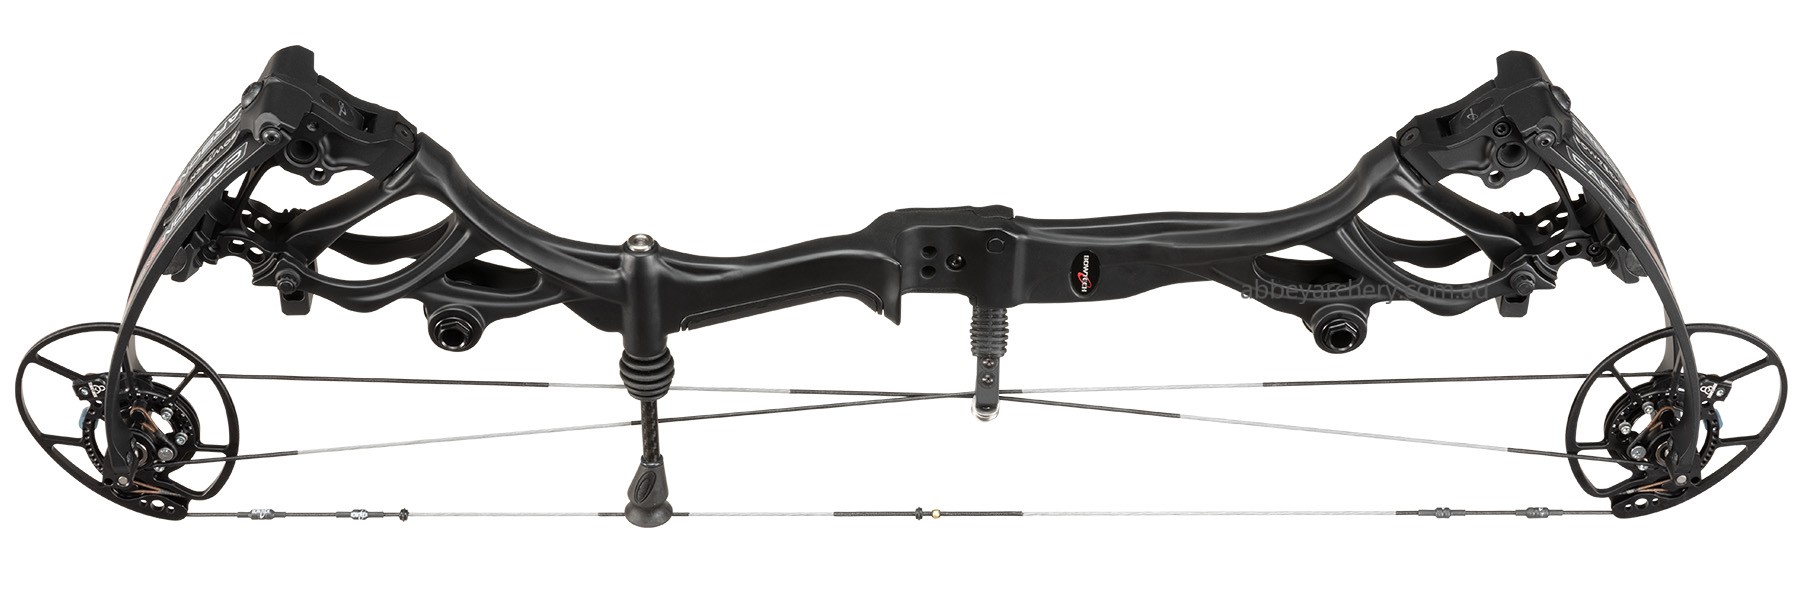 Bowtech Carbon One X large image. Click to return to Bowtech Carbon One X price and description